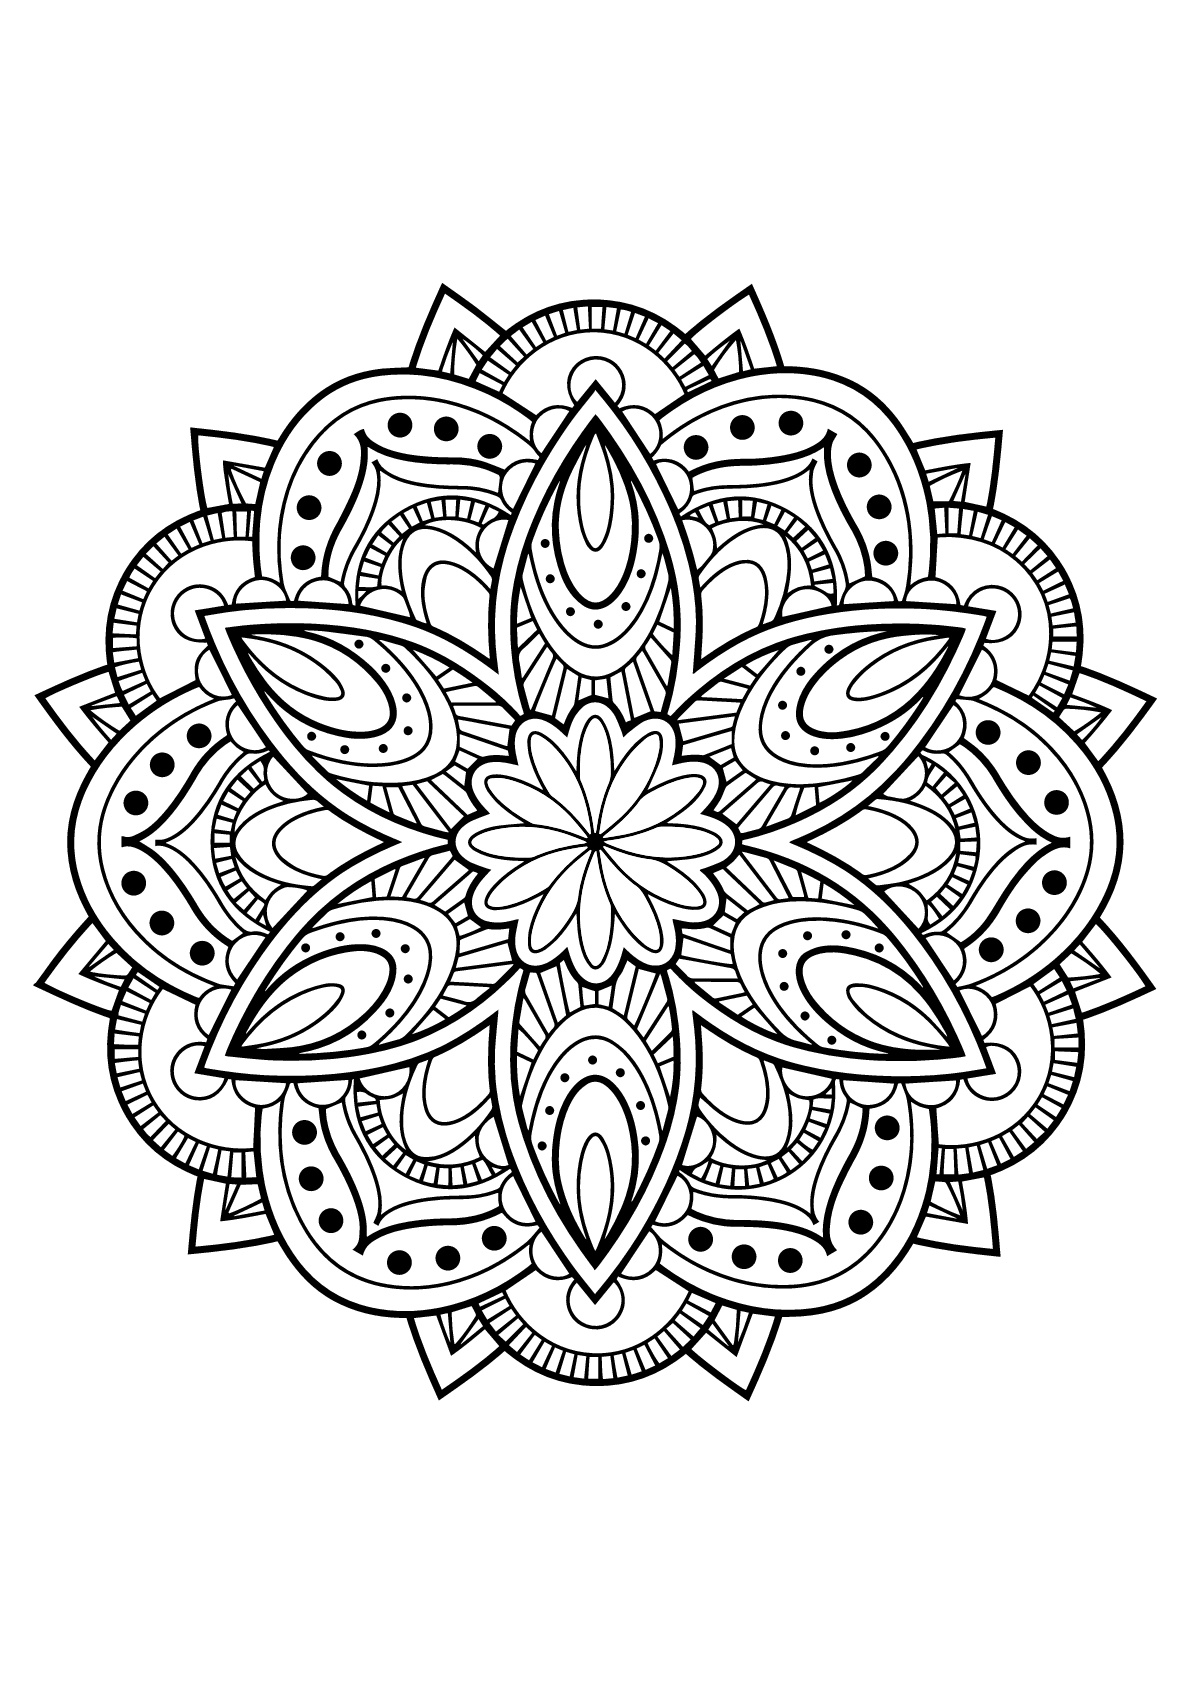 Complex mandala from a free coloring book